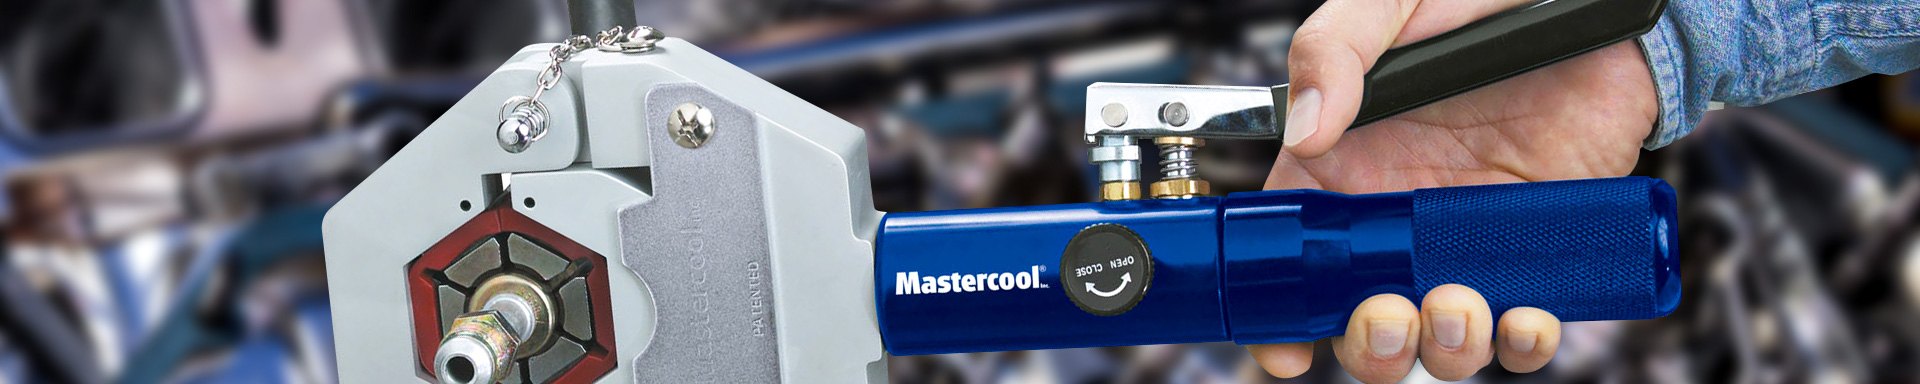 Mastercool Wrenches